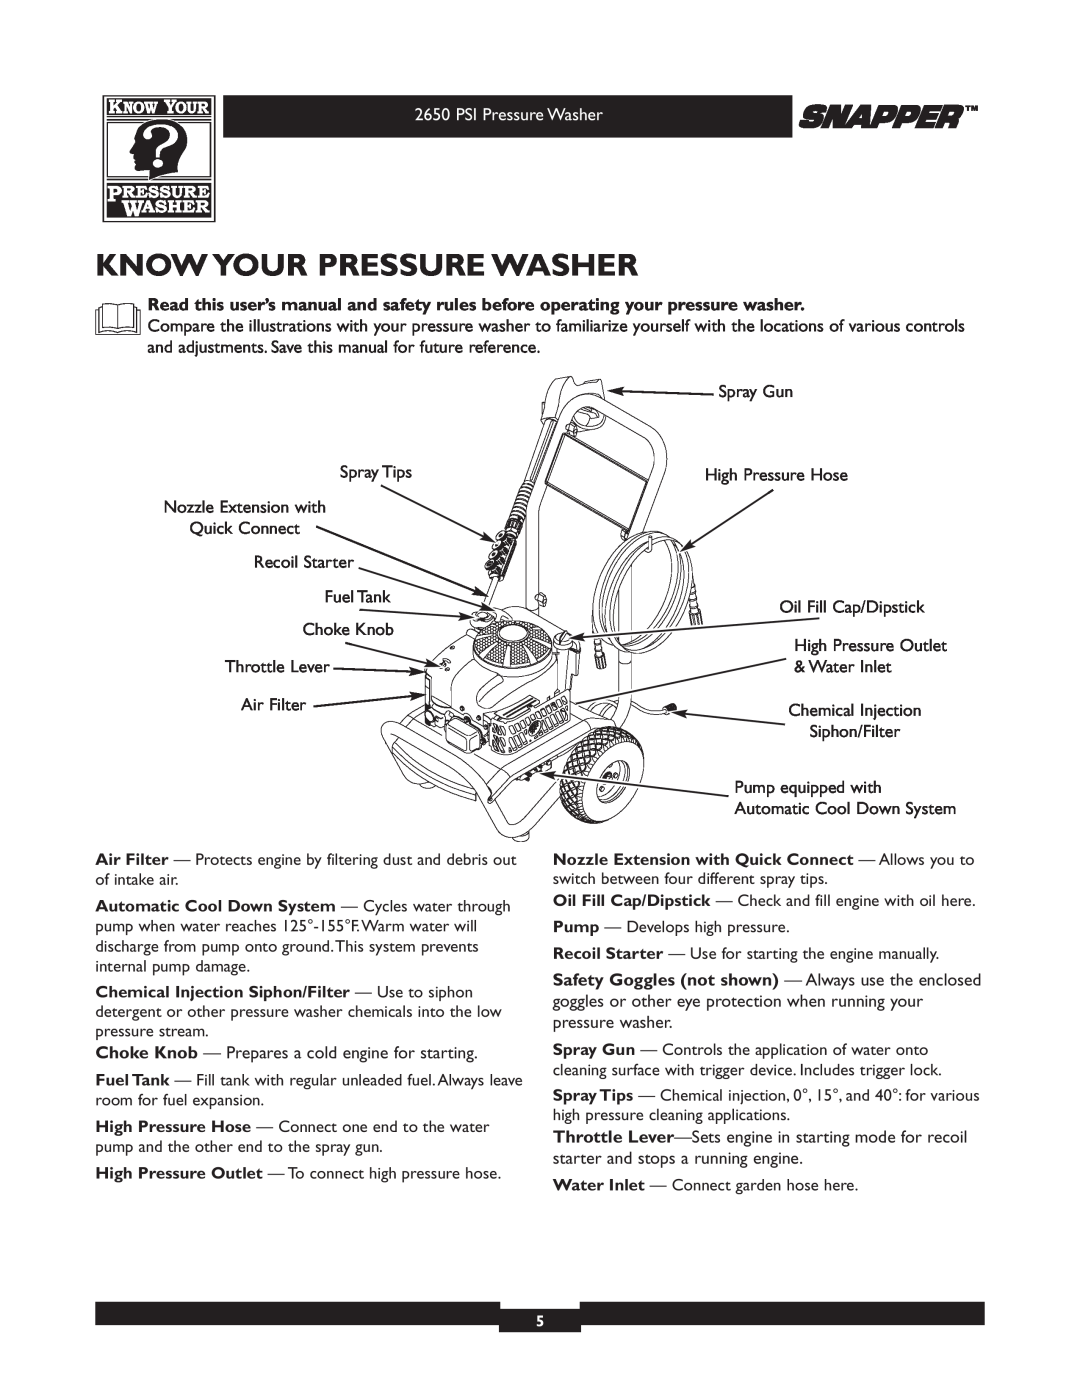 Snapper 020230 user manual Know Your Pressure Washer 